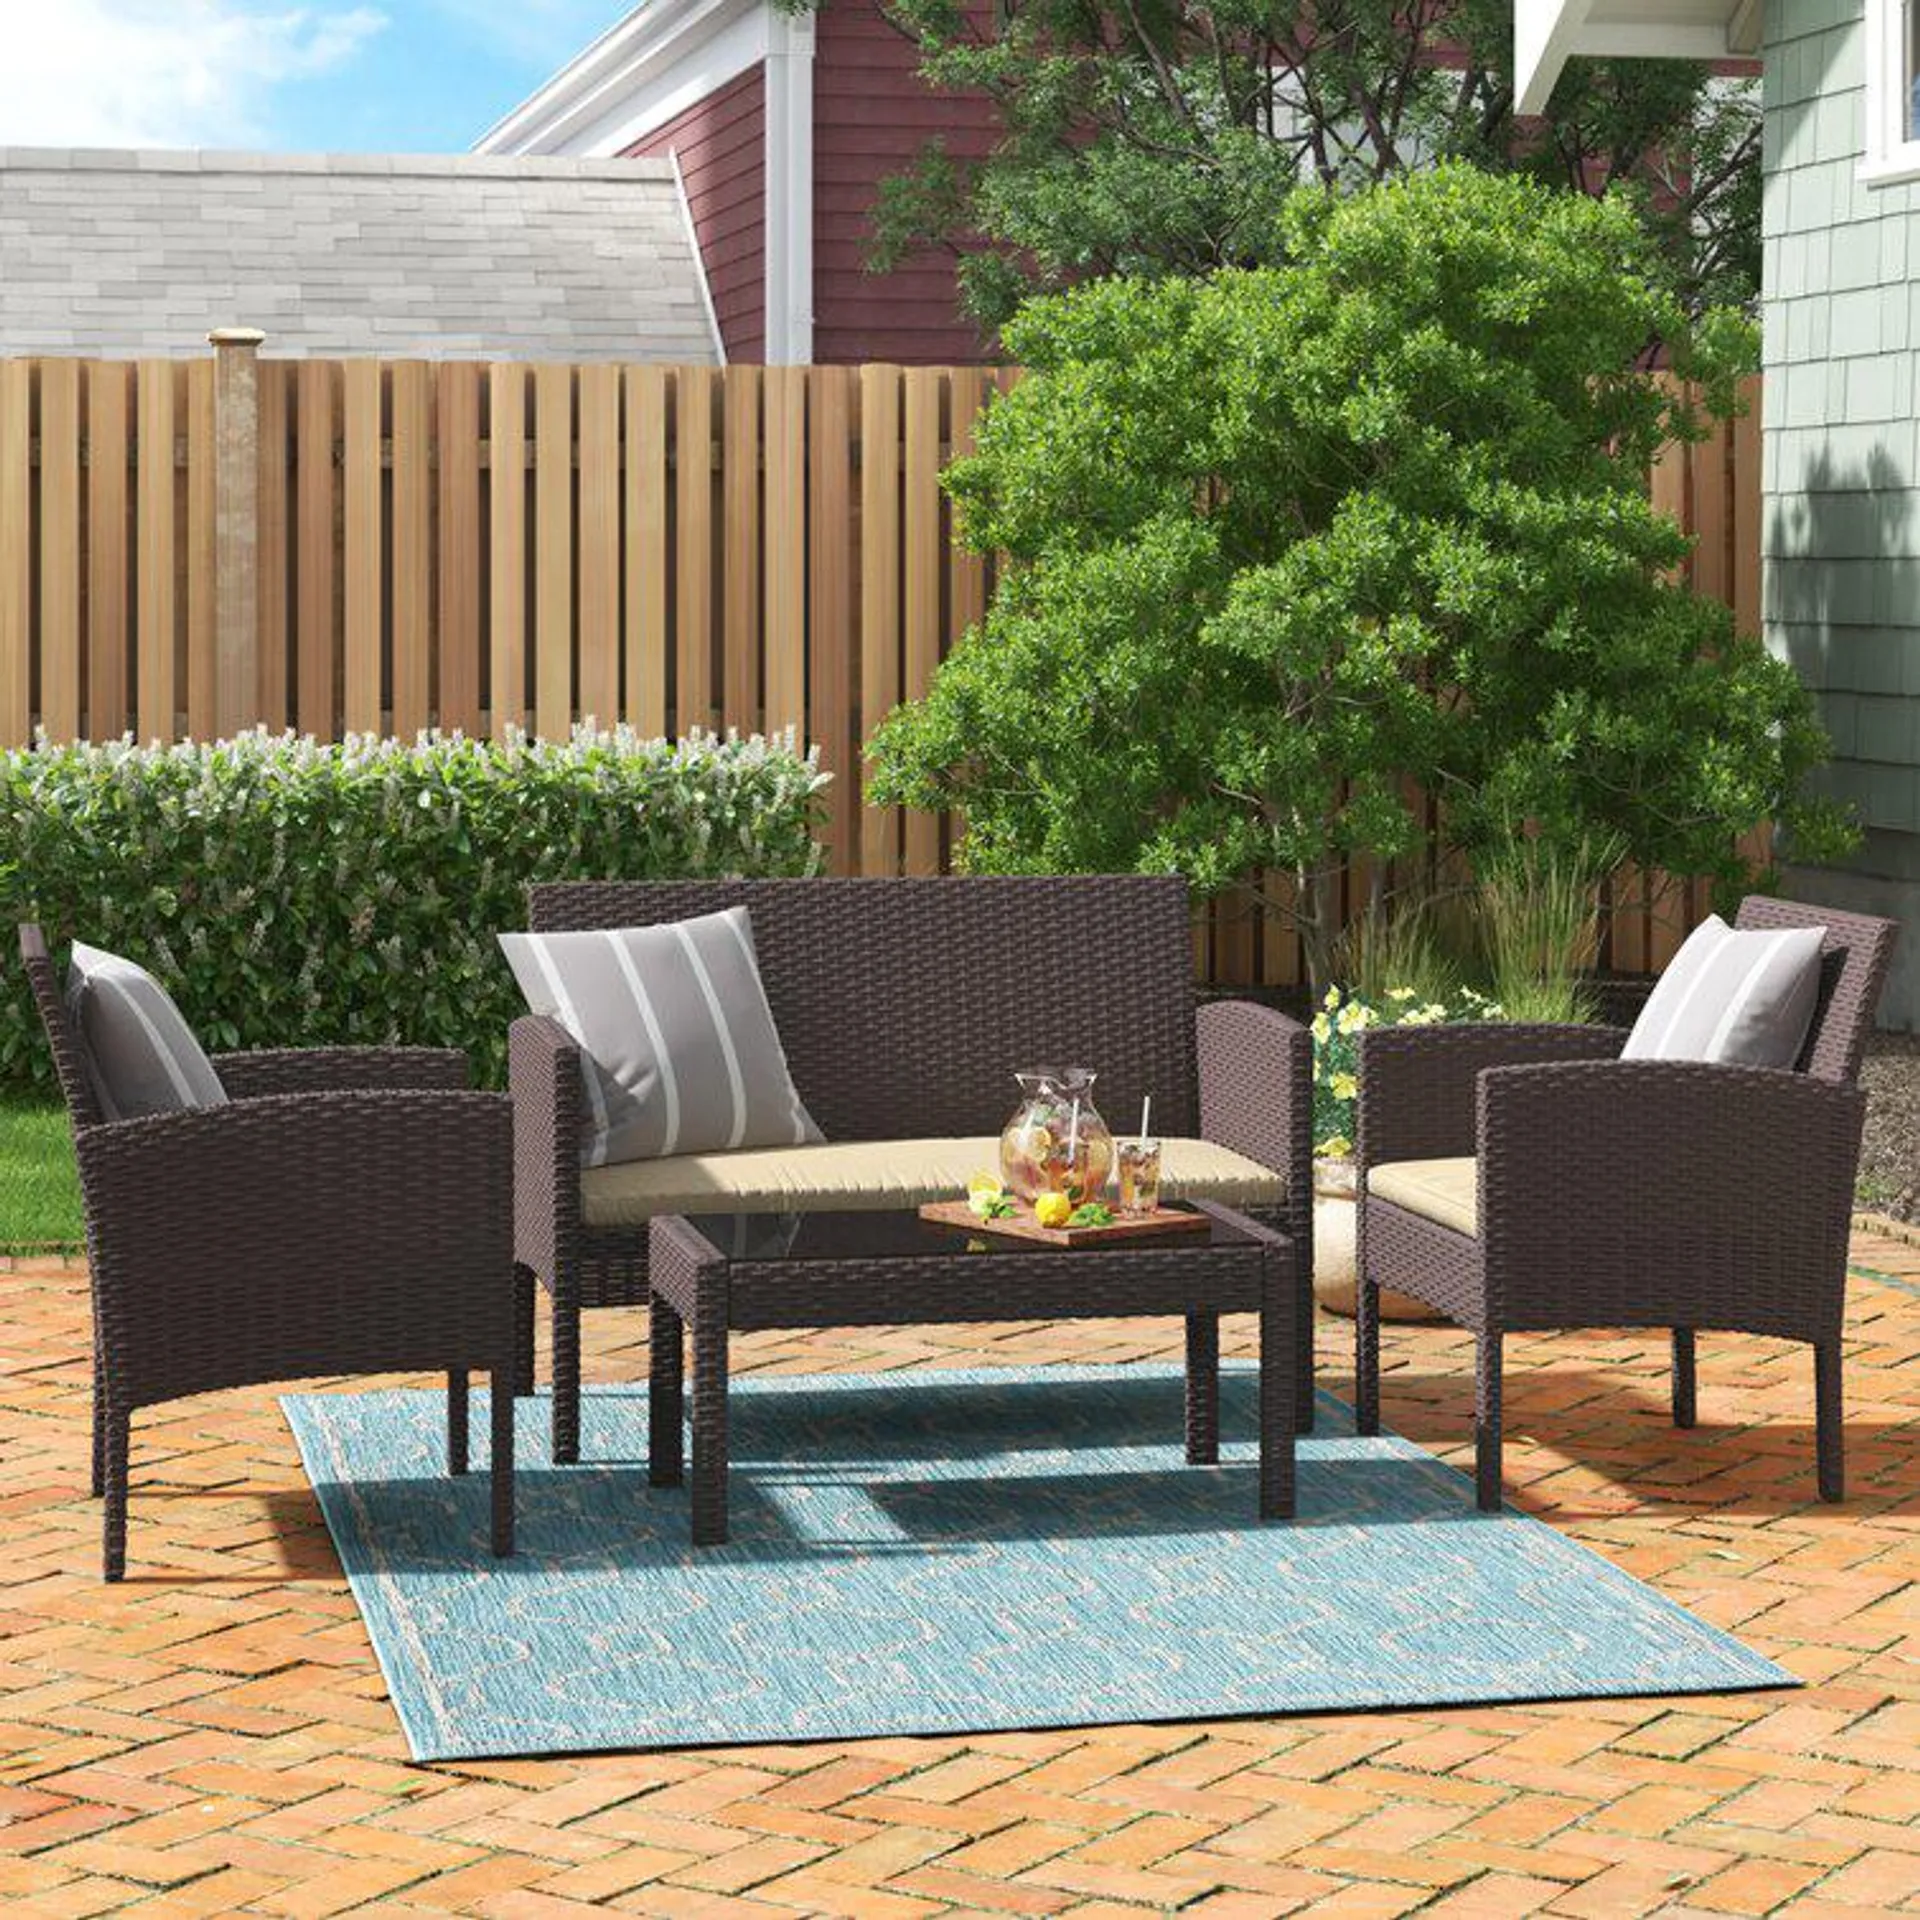 Knopf High-Density Polyethylene (HDPE) Wicker 4 - Person Seating Group with Cushions